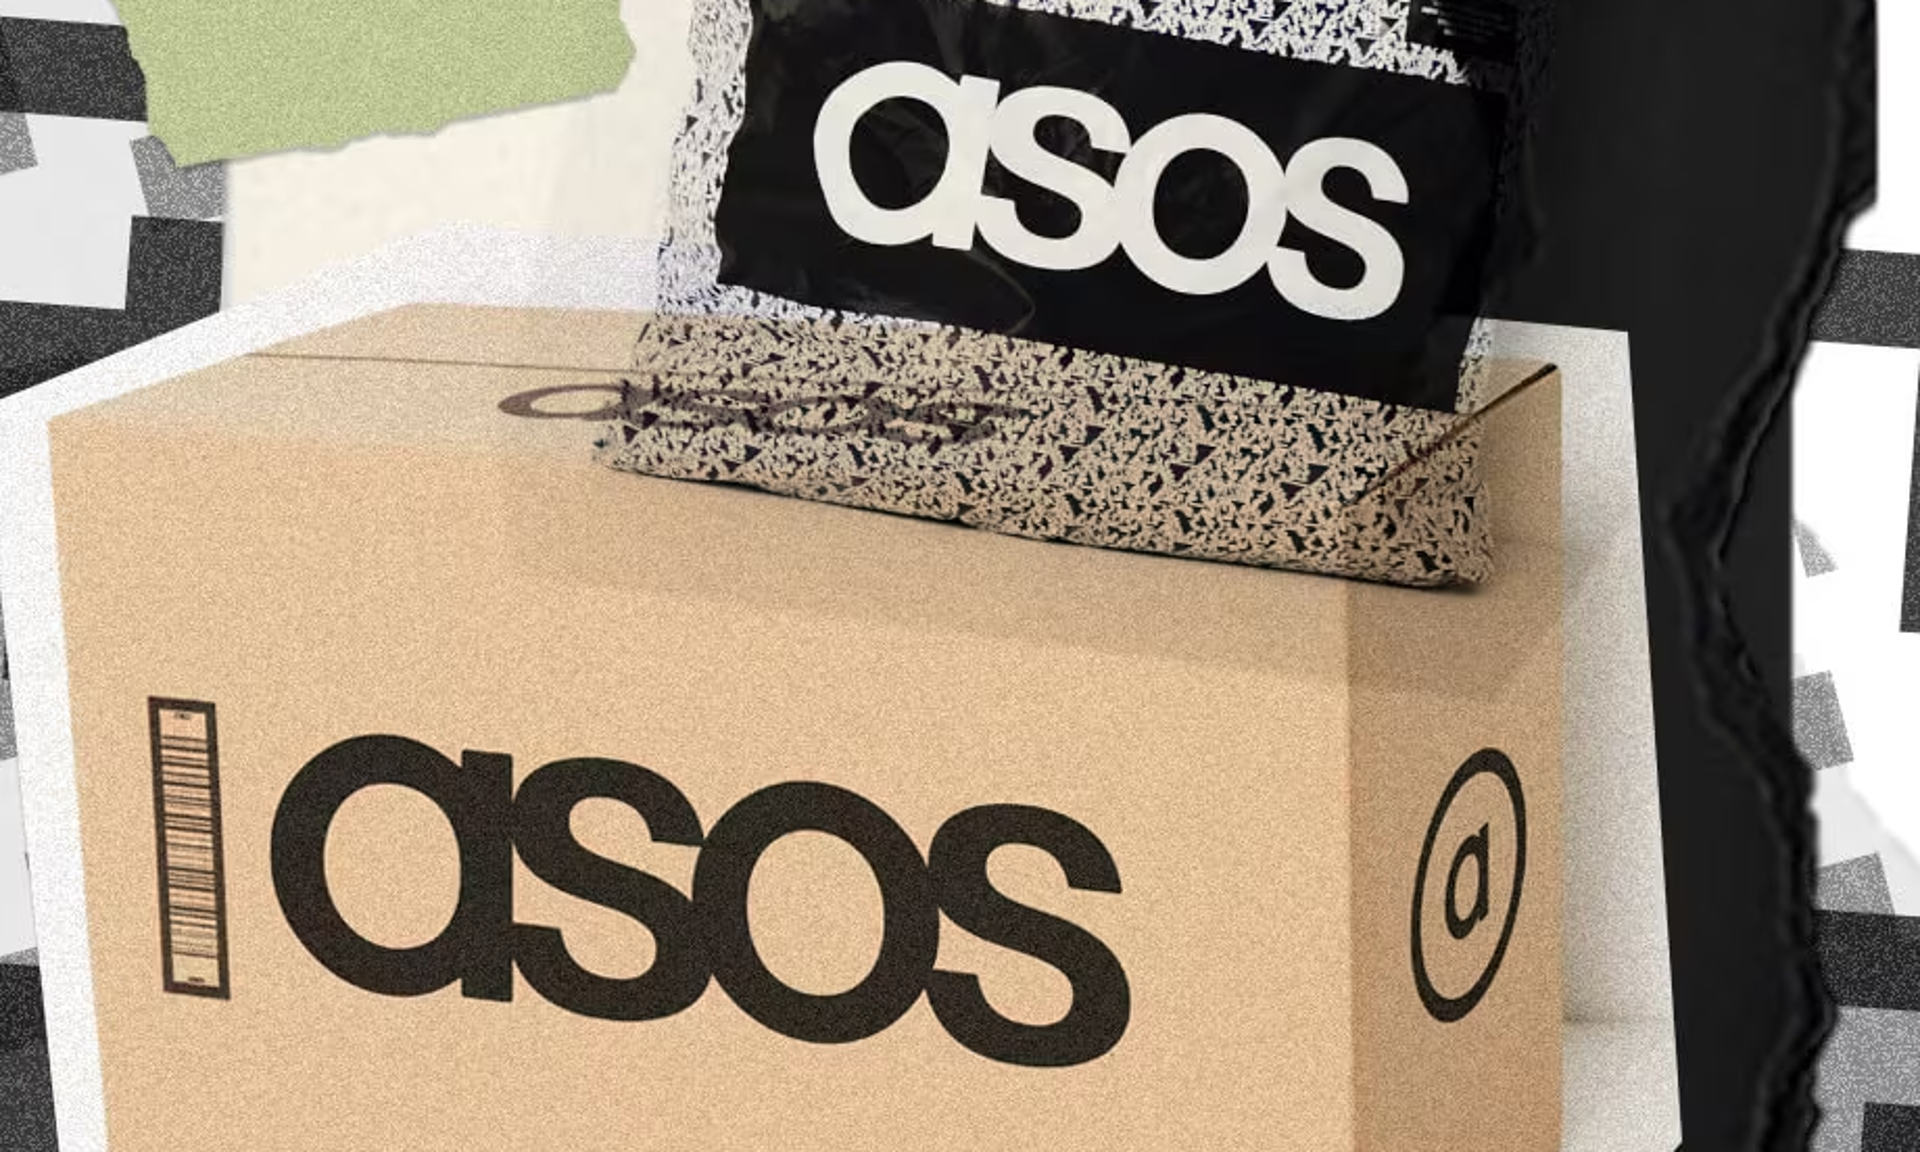  An ASOS parcel on top of an ASOS cardboard box against a digital collage background. 